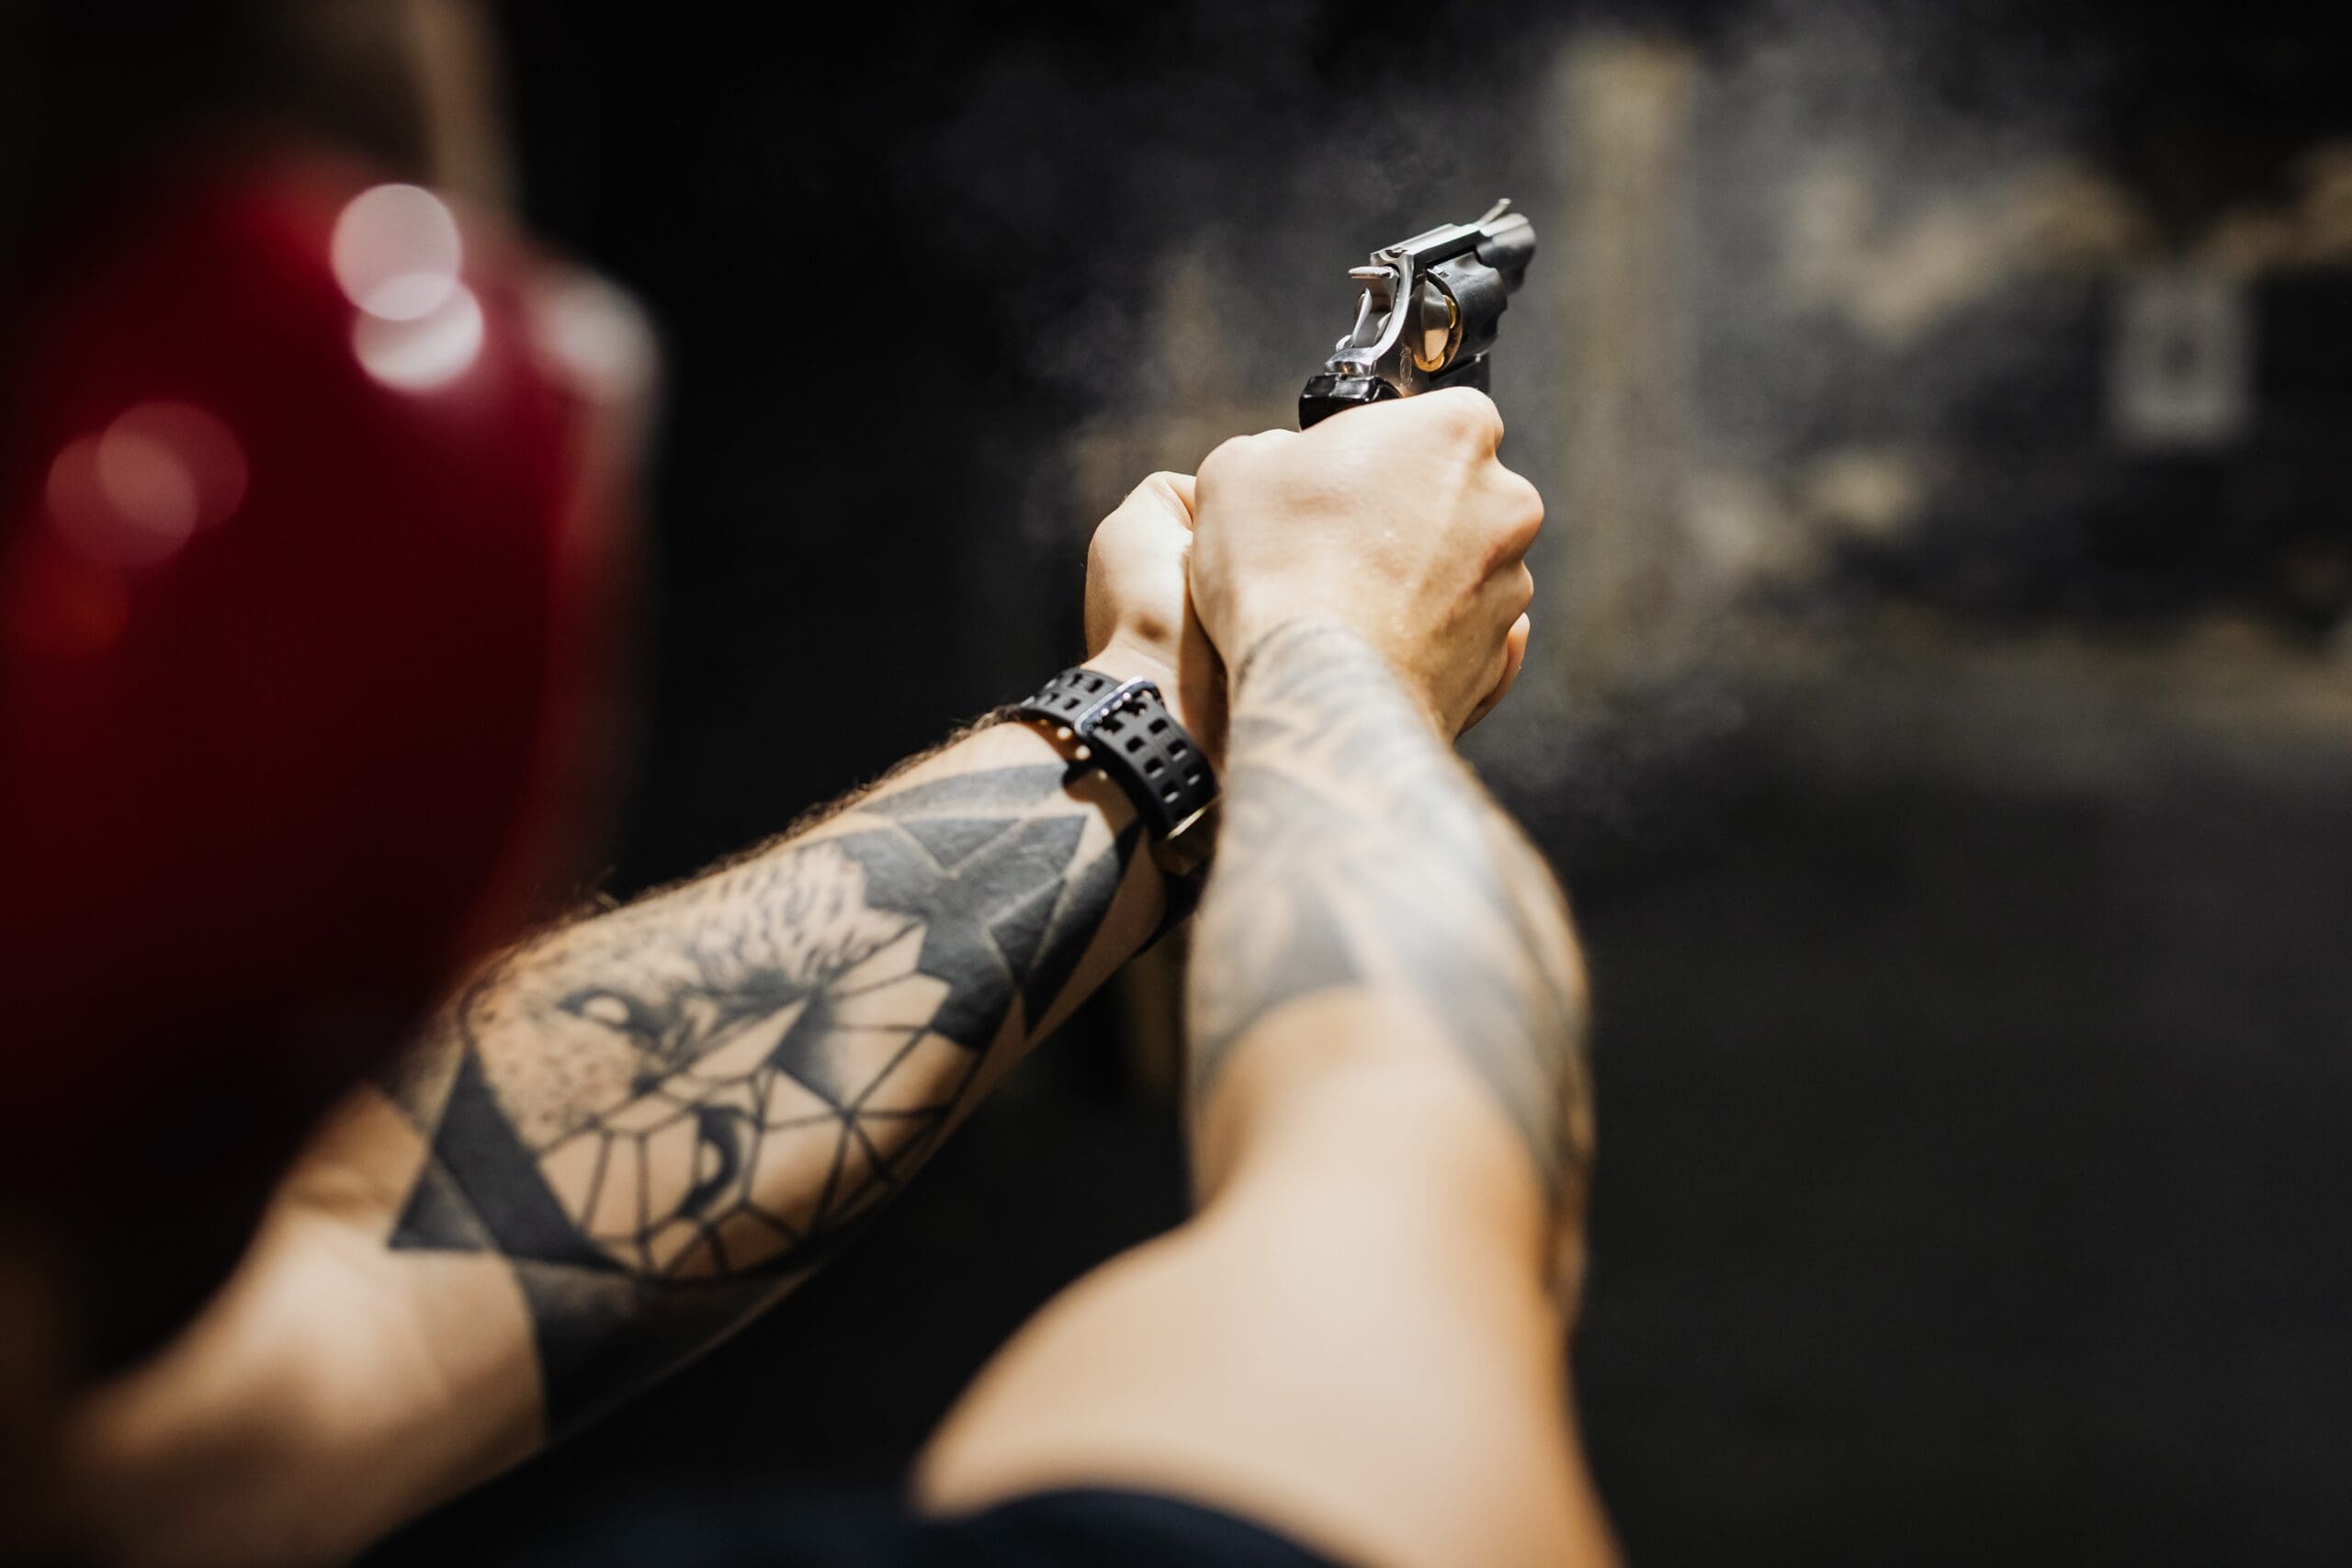 A person with tattoos holding a gun in their hands.